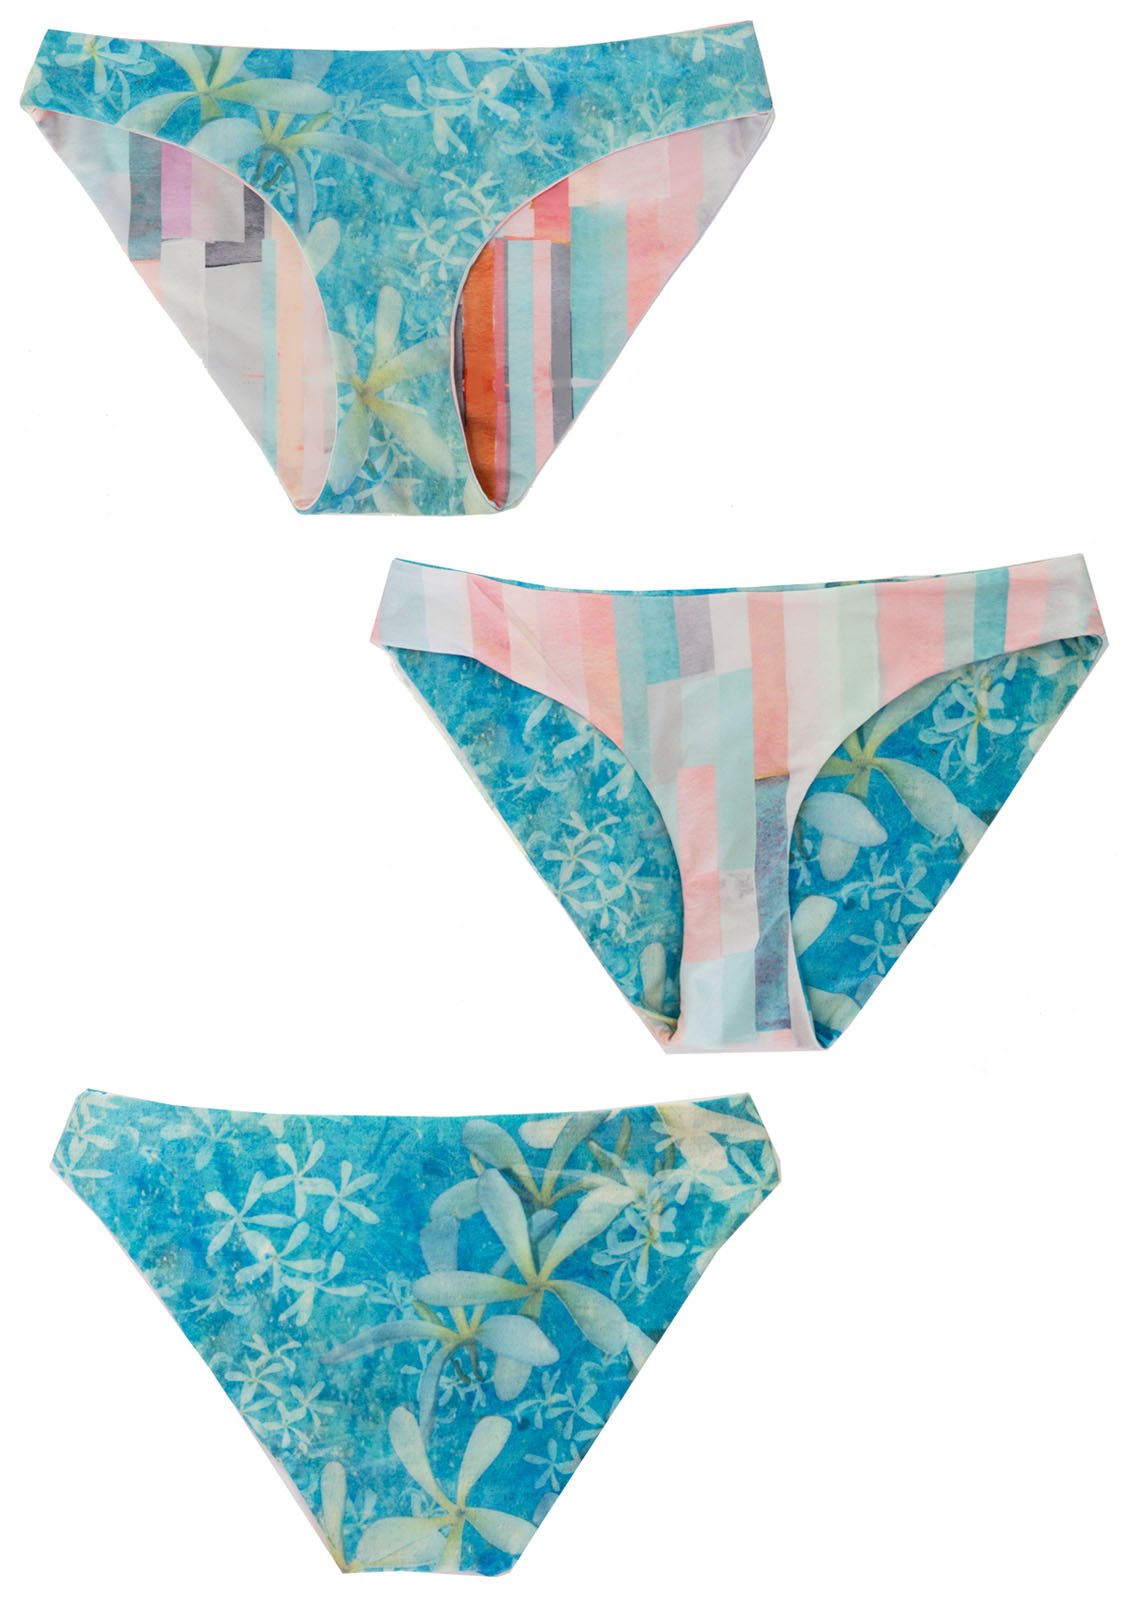 Beautiful Hipster Style Bikini Bottoms, that are reversible. One side has a pastel Print Pattern, and the other side is a Teal Floral Pattern.